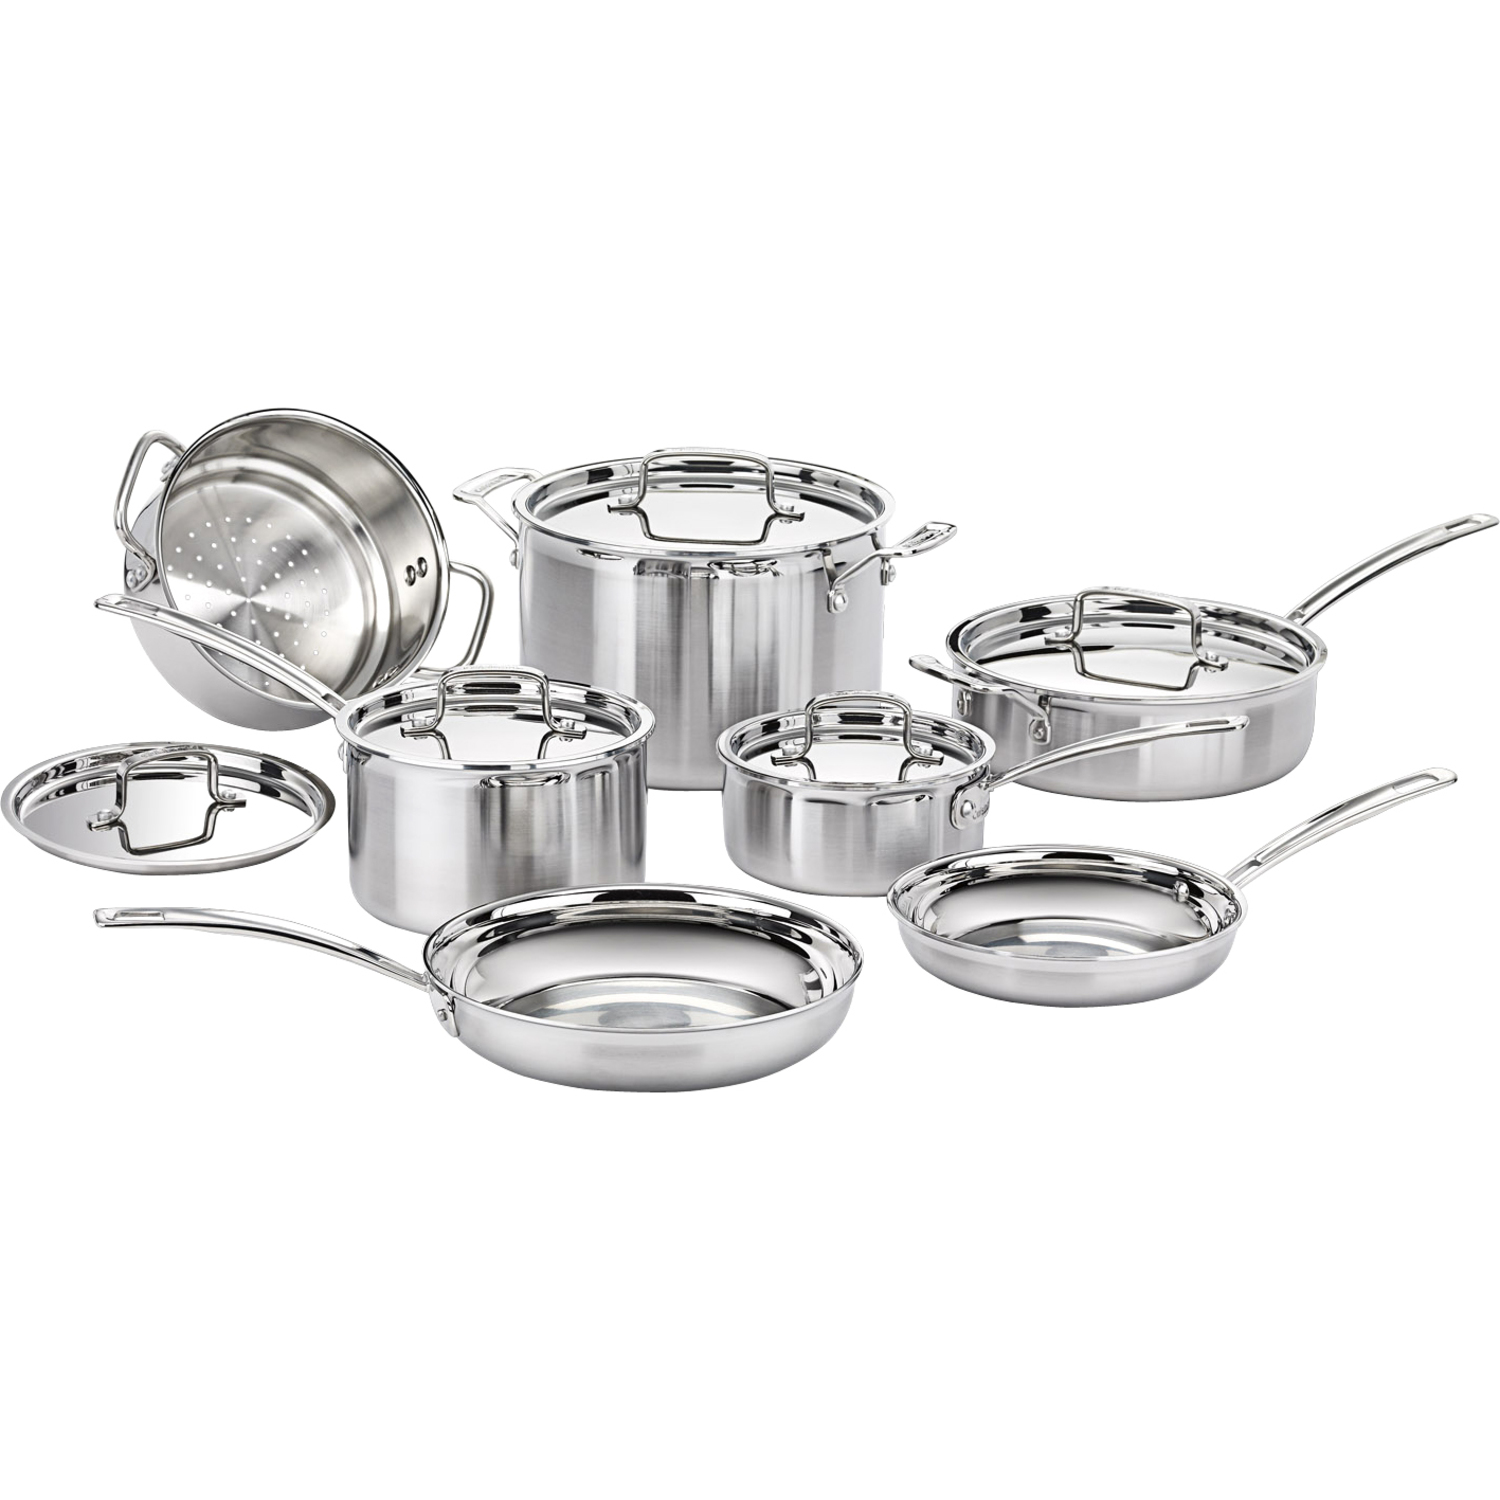 Cuisinart MultiClad Pro 12 Piece Stainless Steel Cookware Set - image 1 of 2